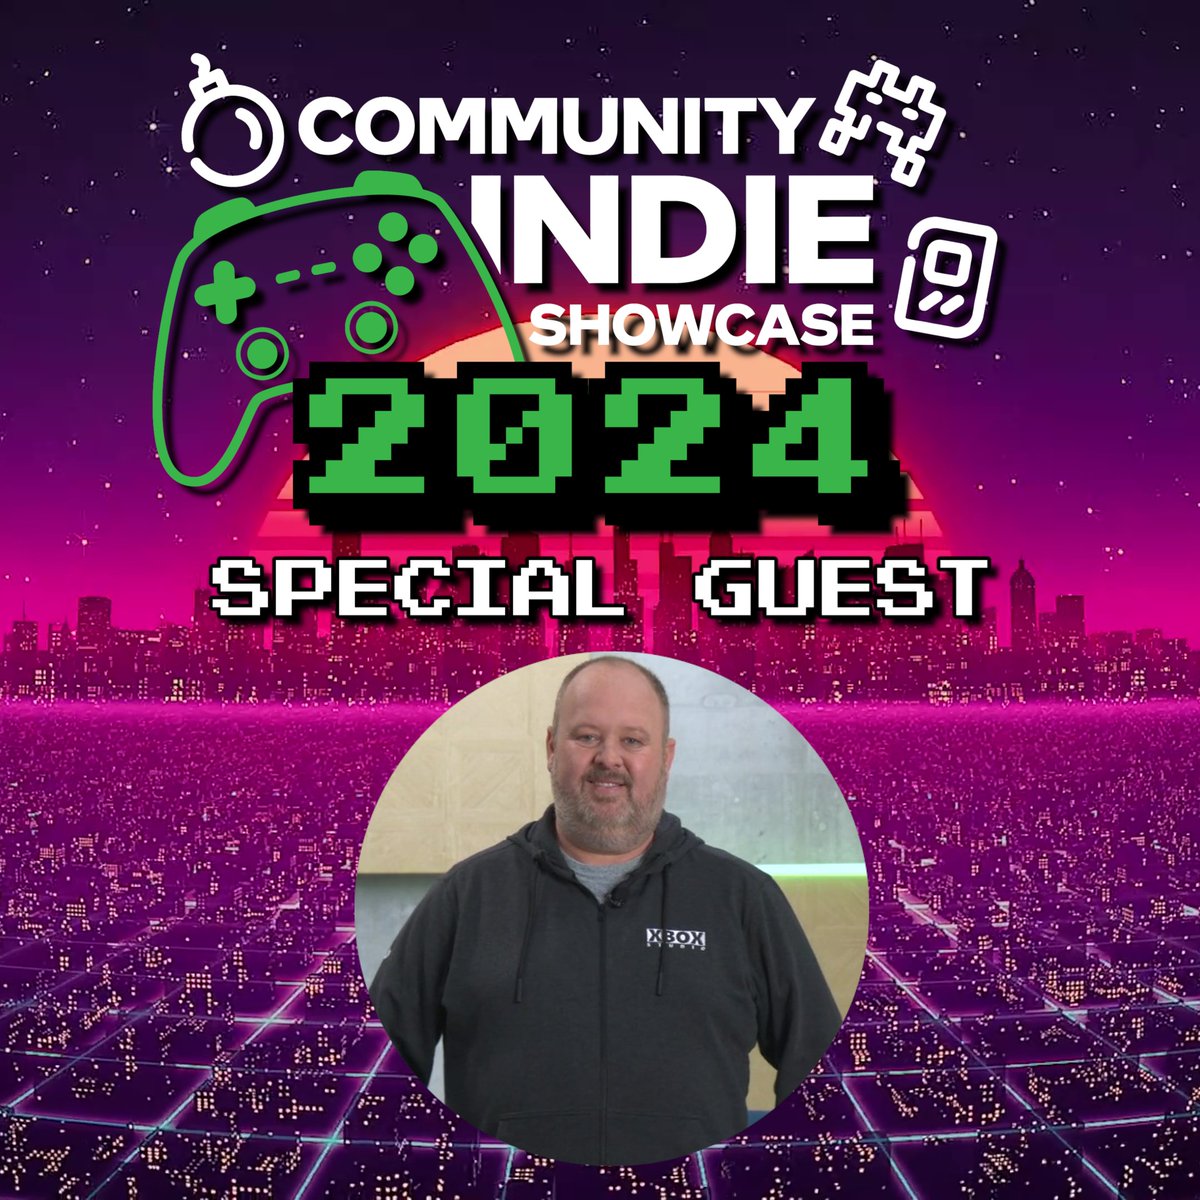 Last But Most Certainly Not Least - Returning Special Guest - VP | @Xbox Games Marketing at @Microsoft - Board Member of @GamersOutreach & @SpecialEffect VP - @aarongreenberg

#CommunityIndieShowcase2024
#CommunityIndieShowcase #CIS2024